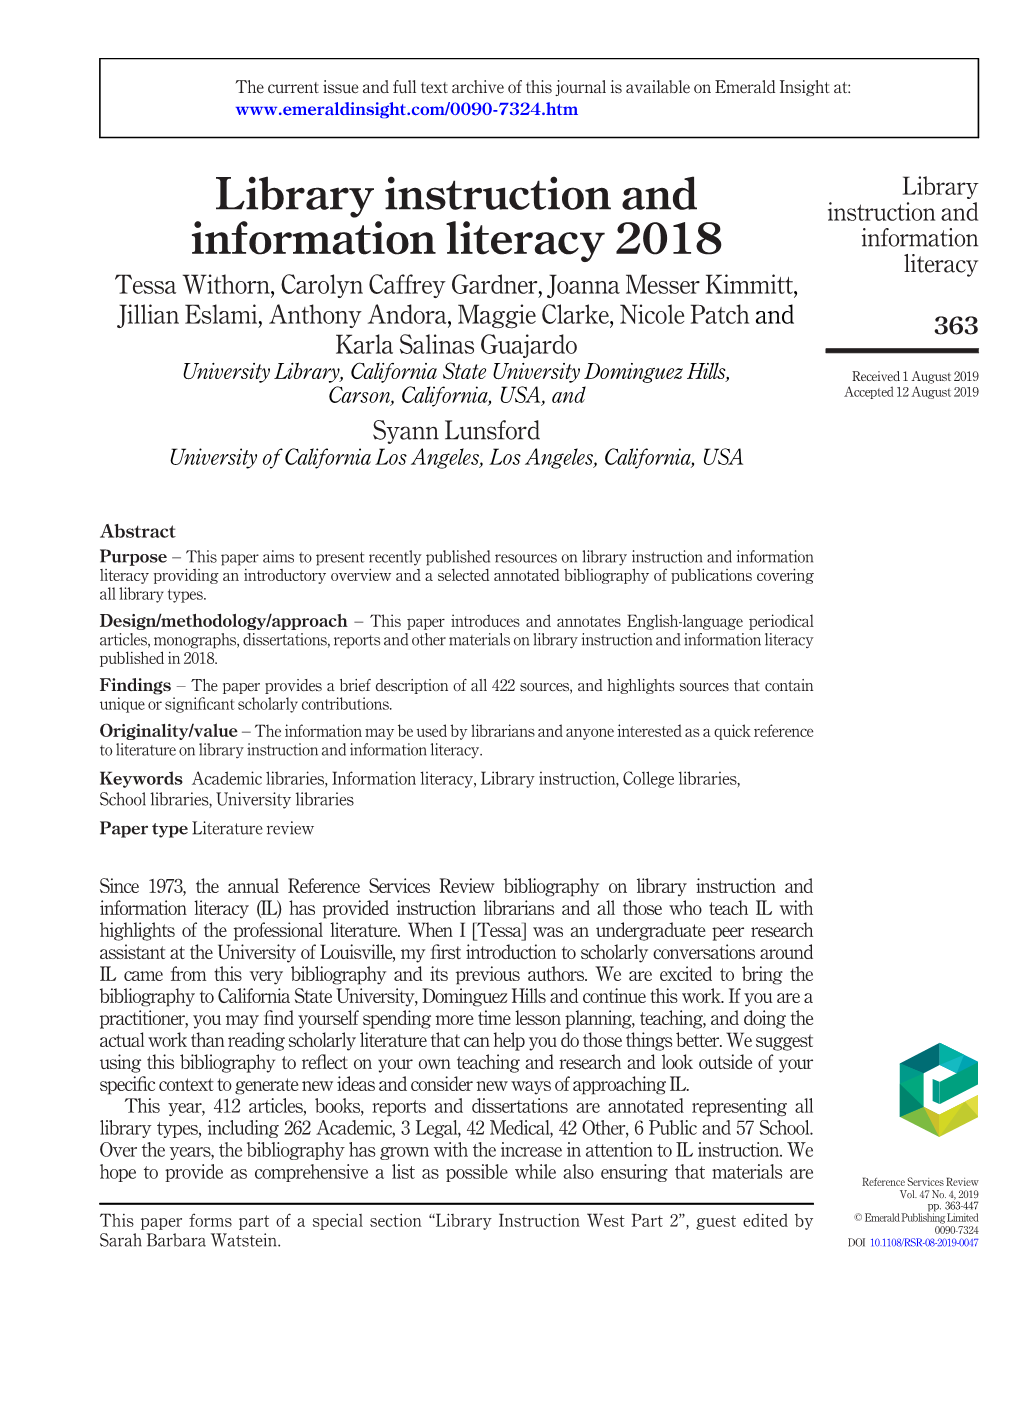 Library Instruction and Information Literacy 2018